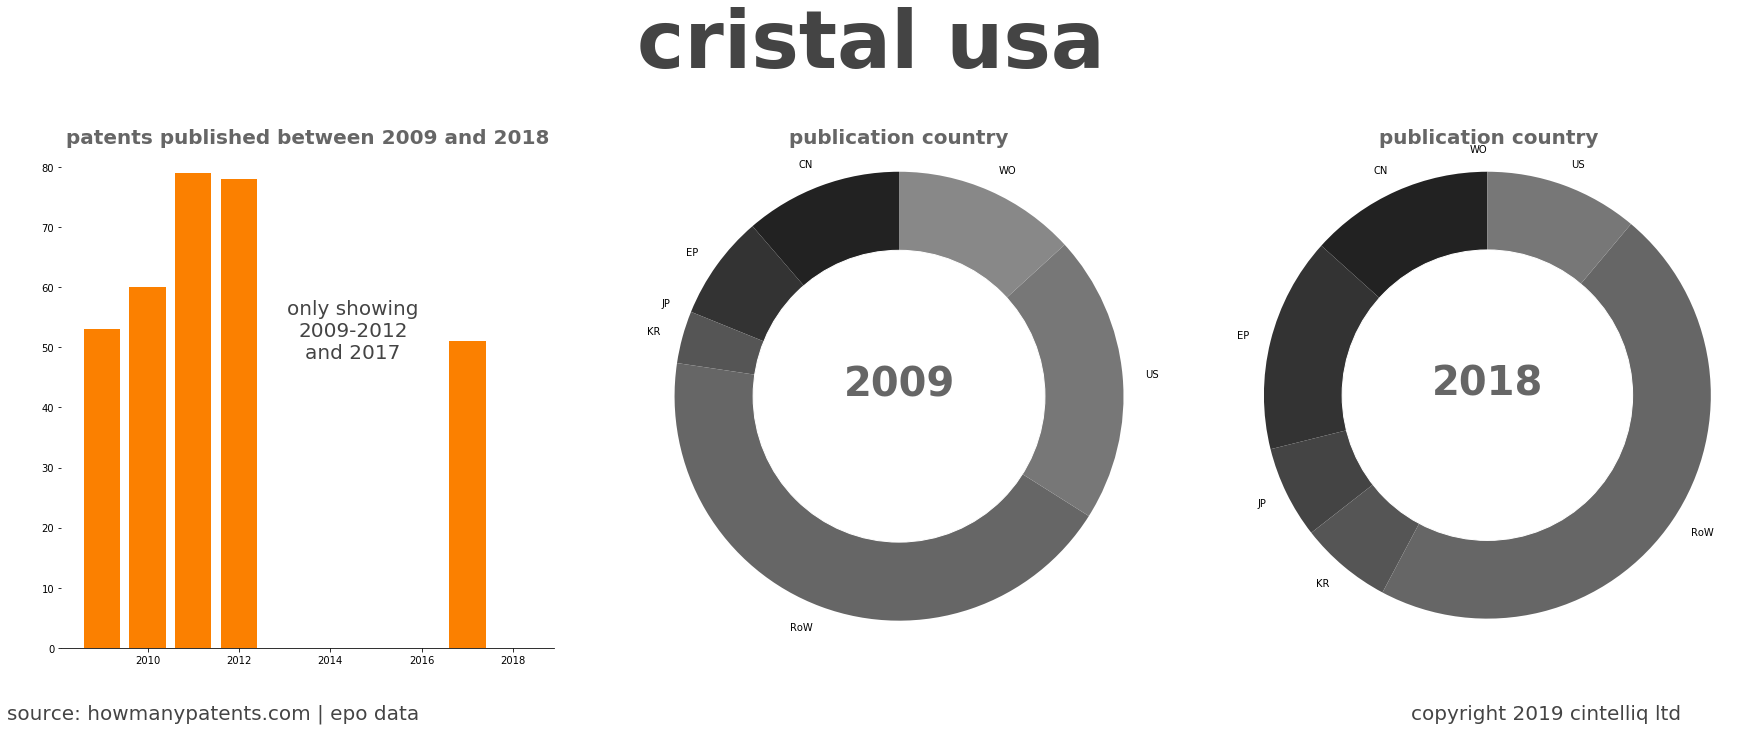 summary of patents for Cristal Usa